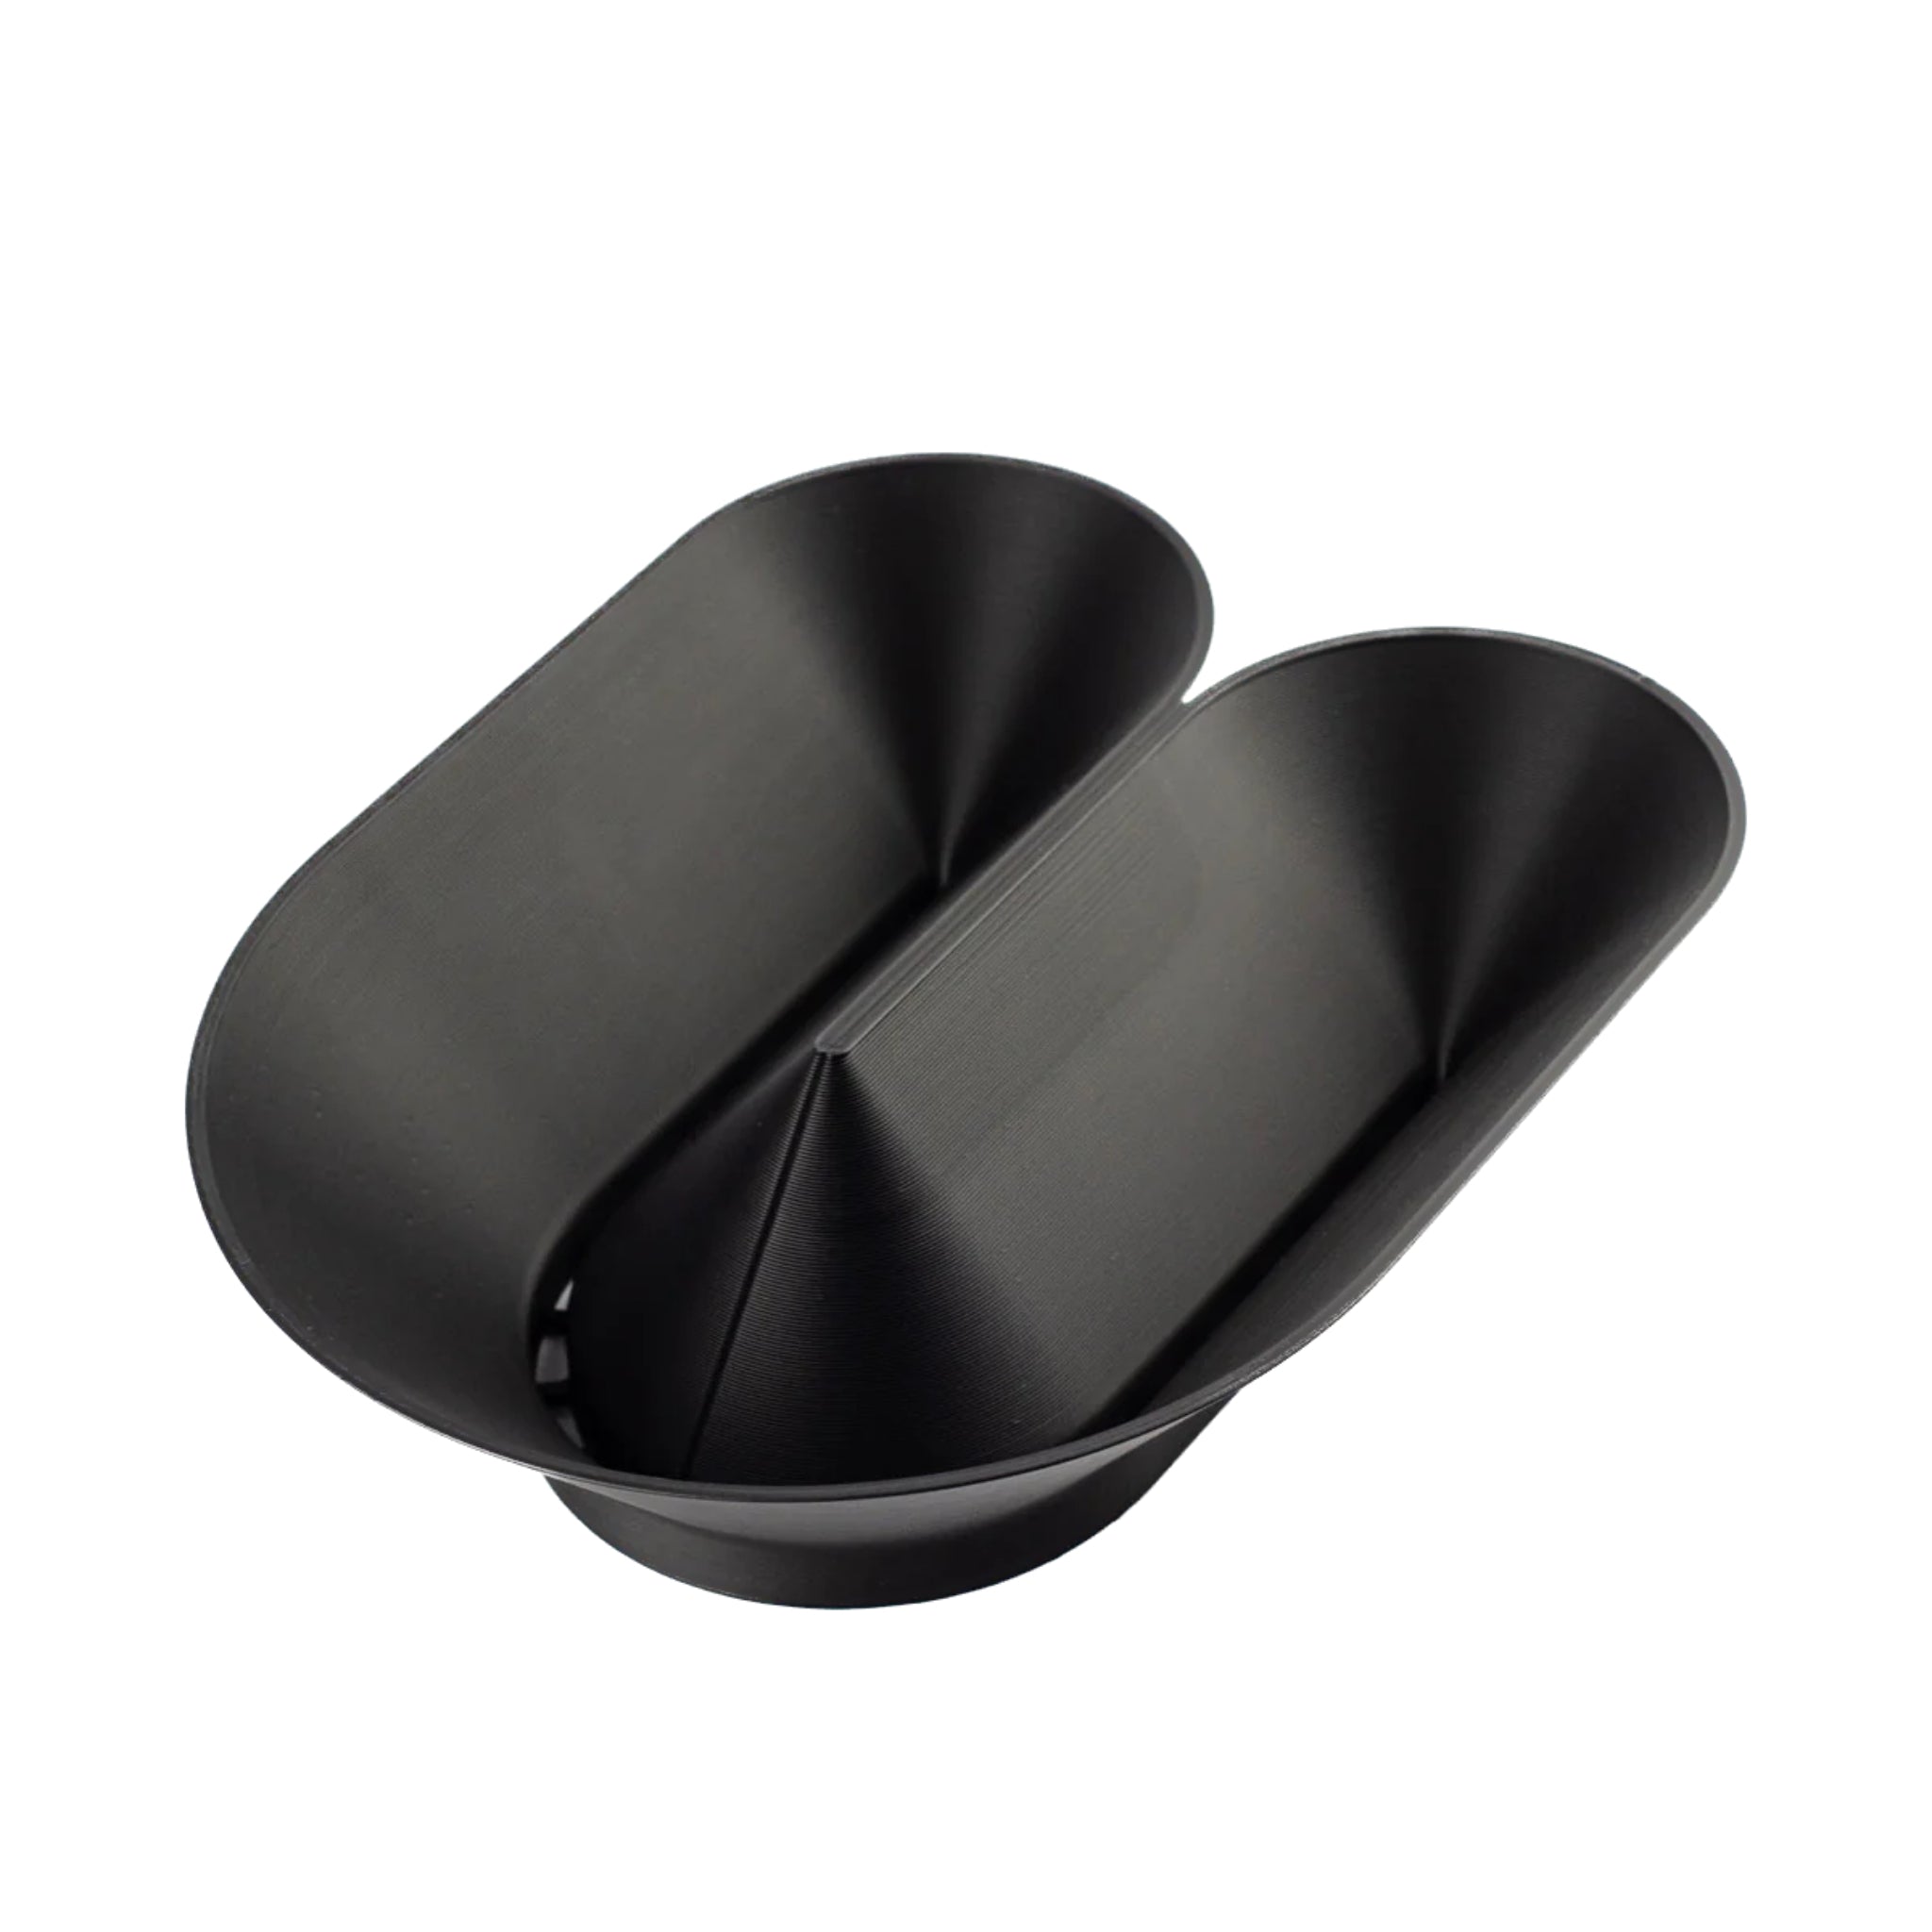 Cyrc U fruit bowl in black- 3D printed recycled plastic. Product place in front of a white background